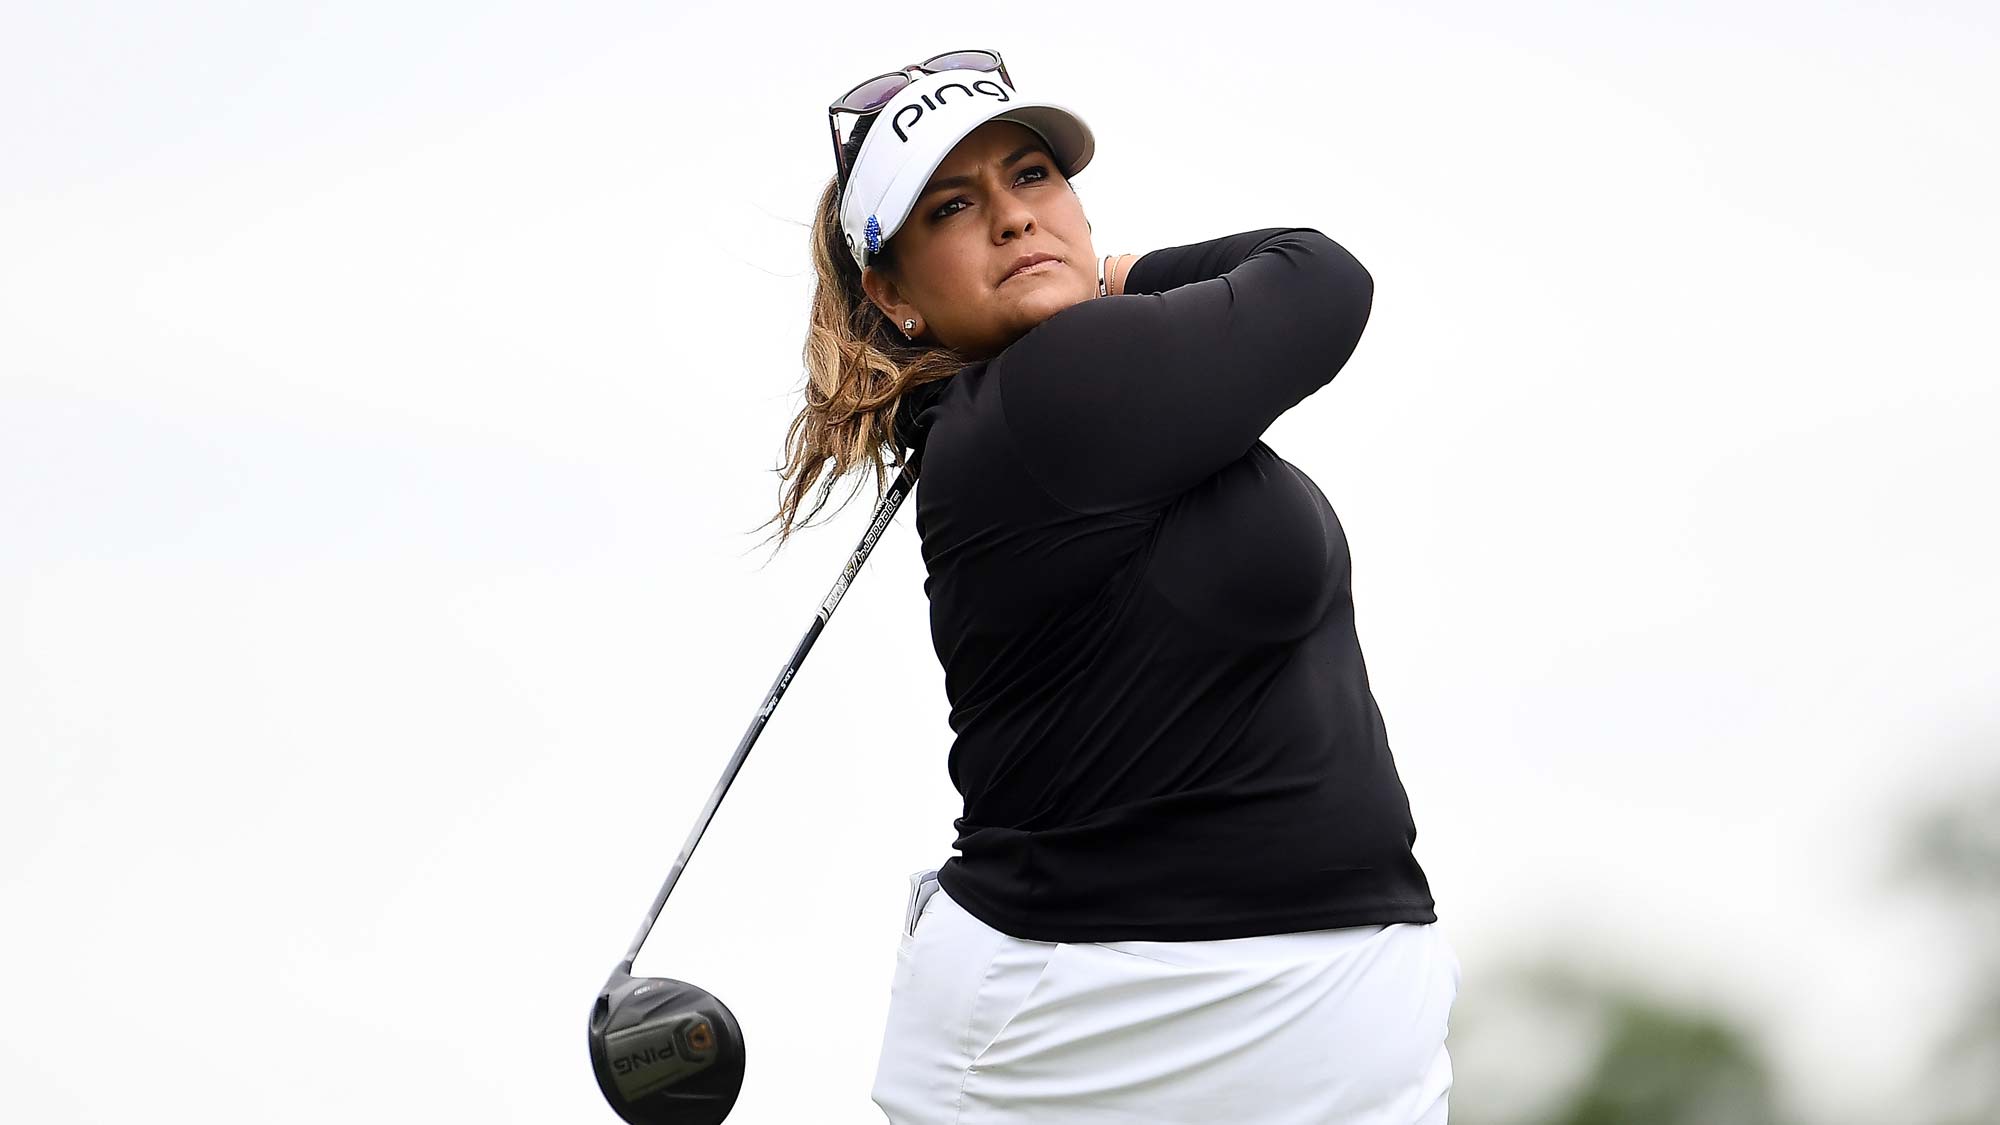 Lizette Salas hits her tee shot on the third hole during the third round of the KPMG PGA Championship 